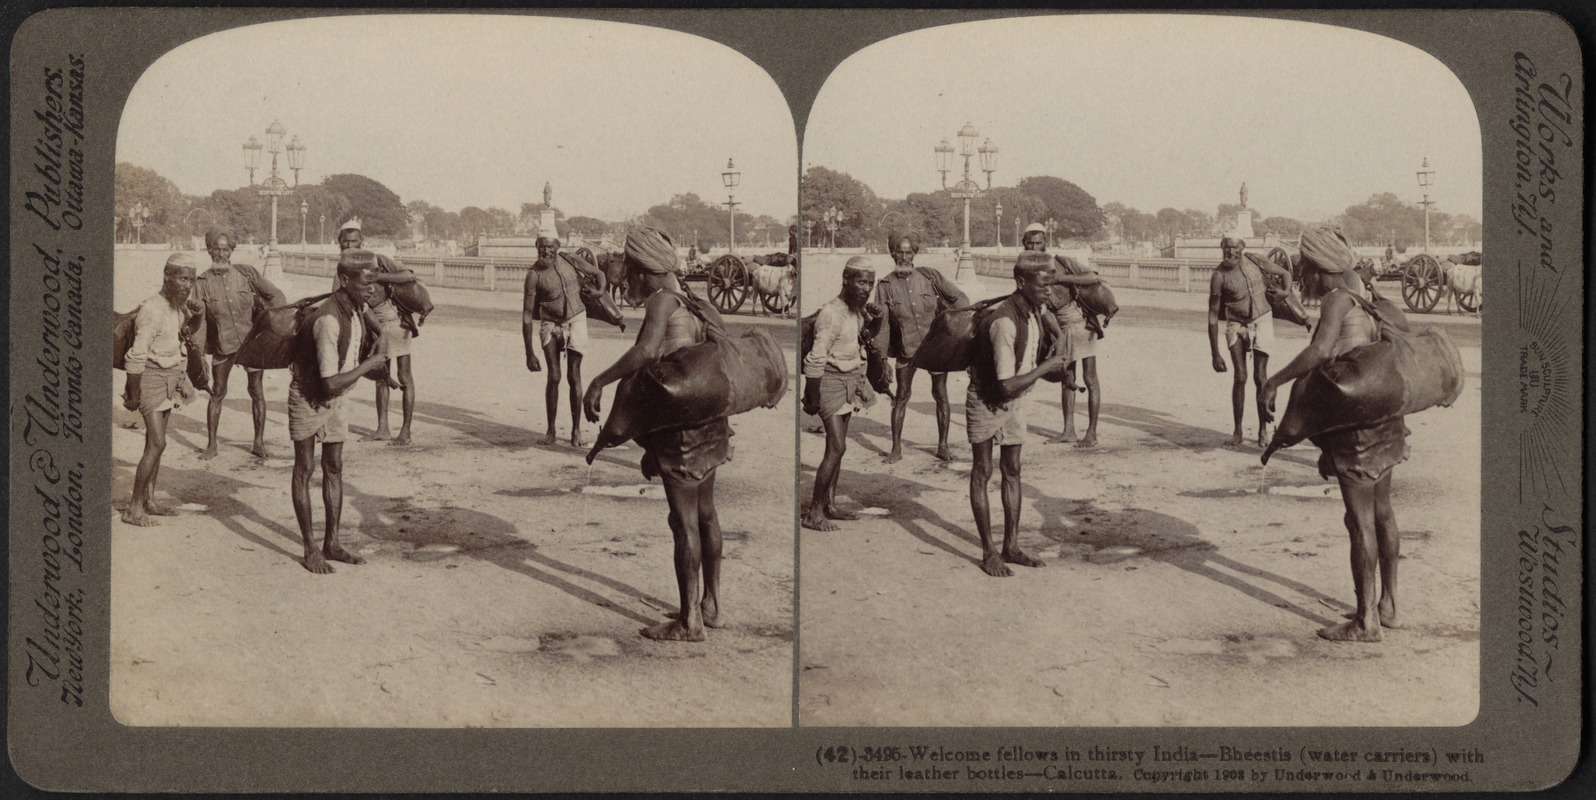 Welcome fellows in thirsty India - water-carriers at Calcutta, India